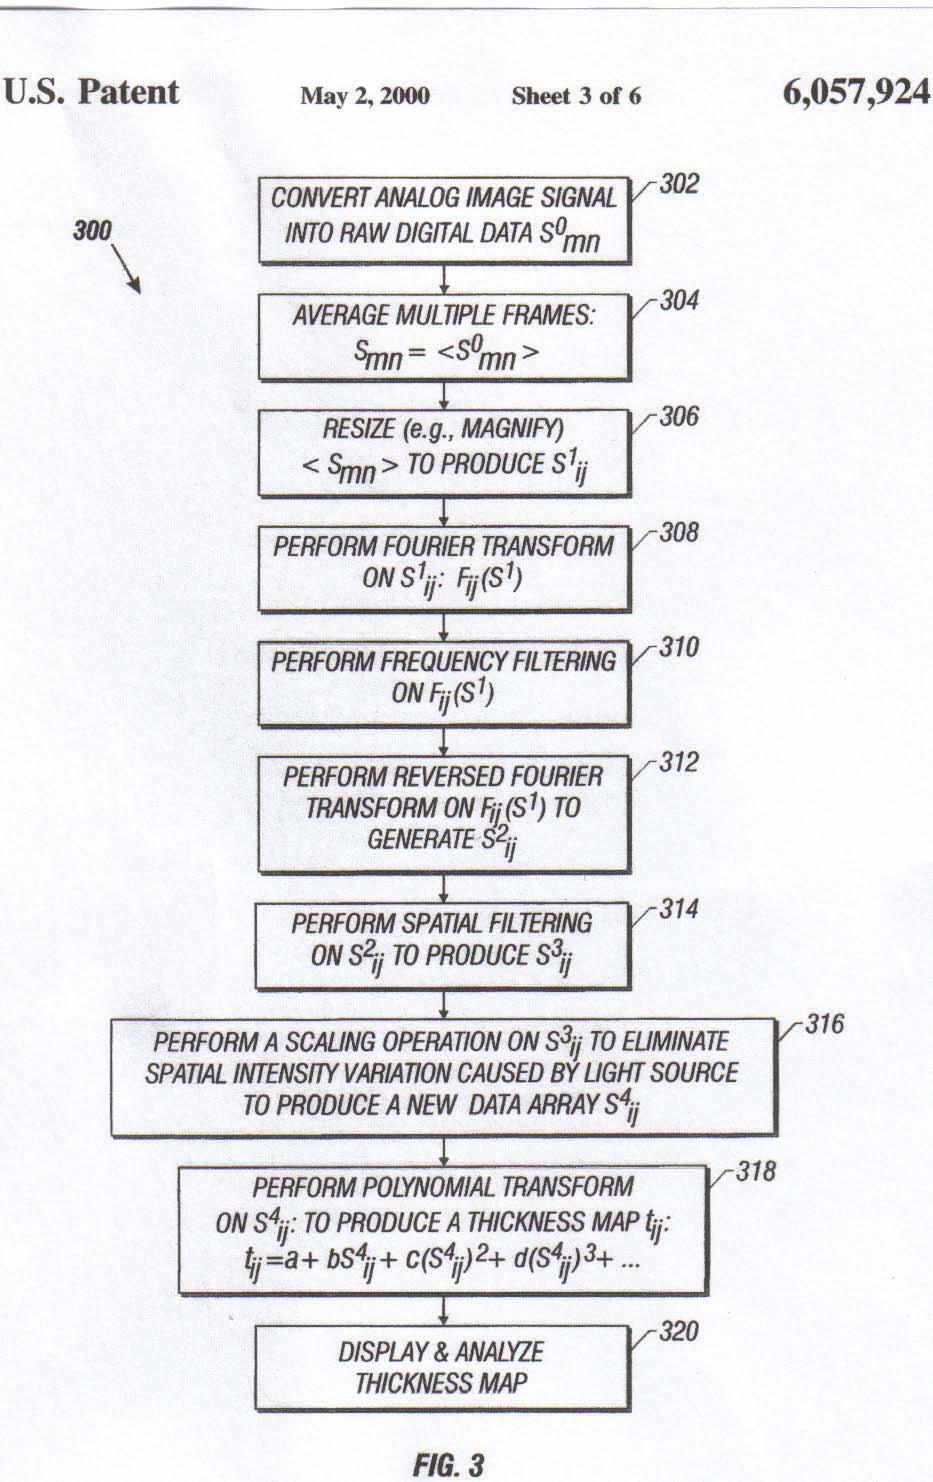 Figure 2 is taken directly from the US Patent and further illustrates the OMMS configuration.